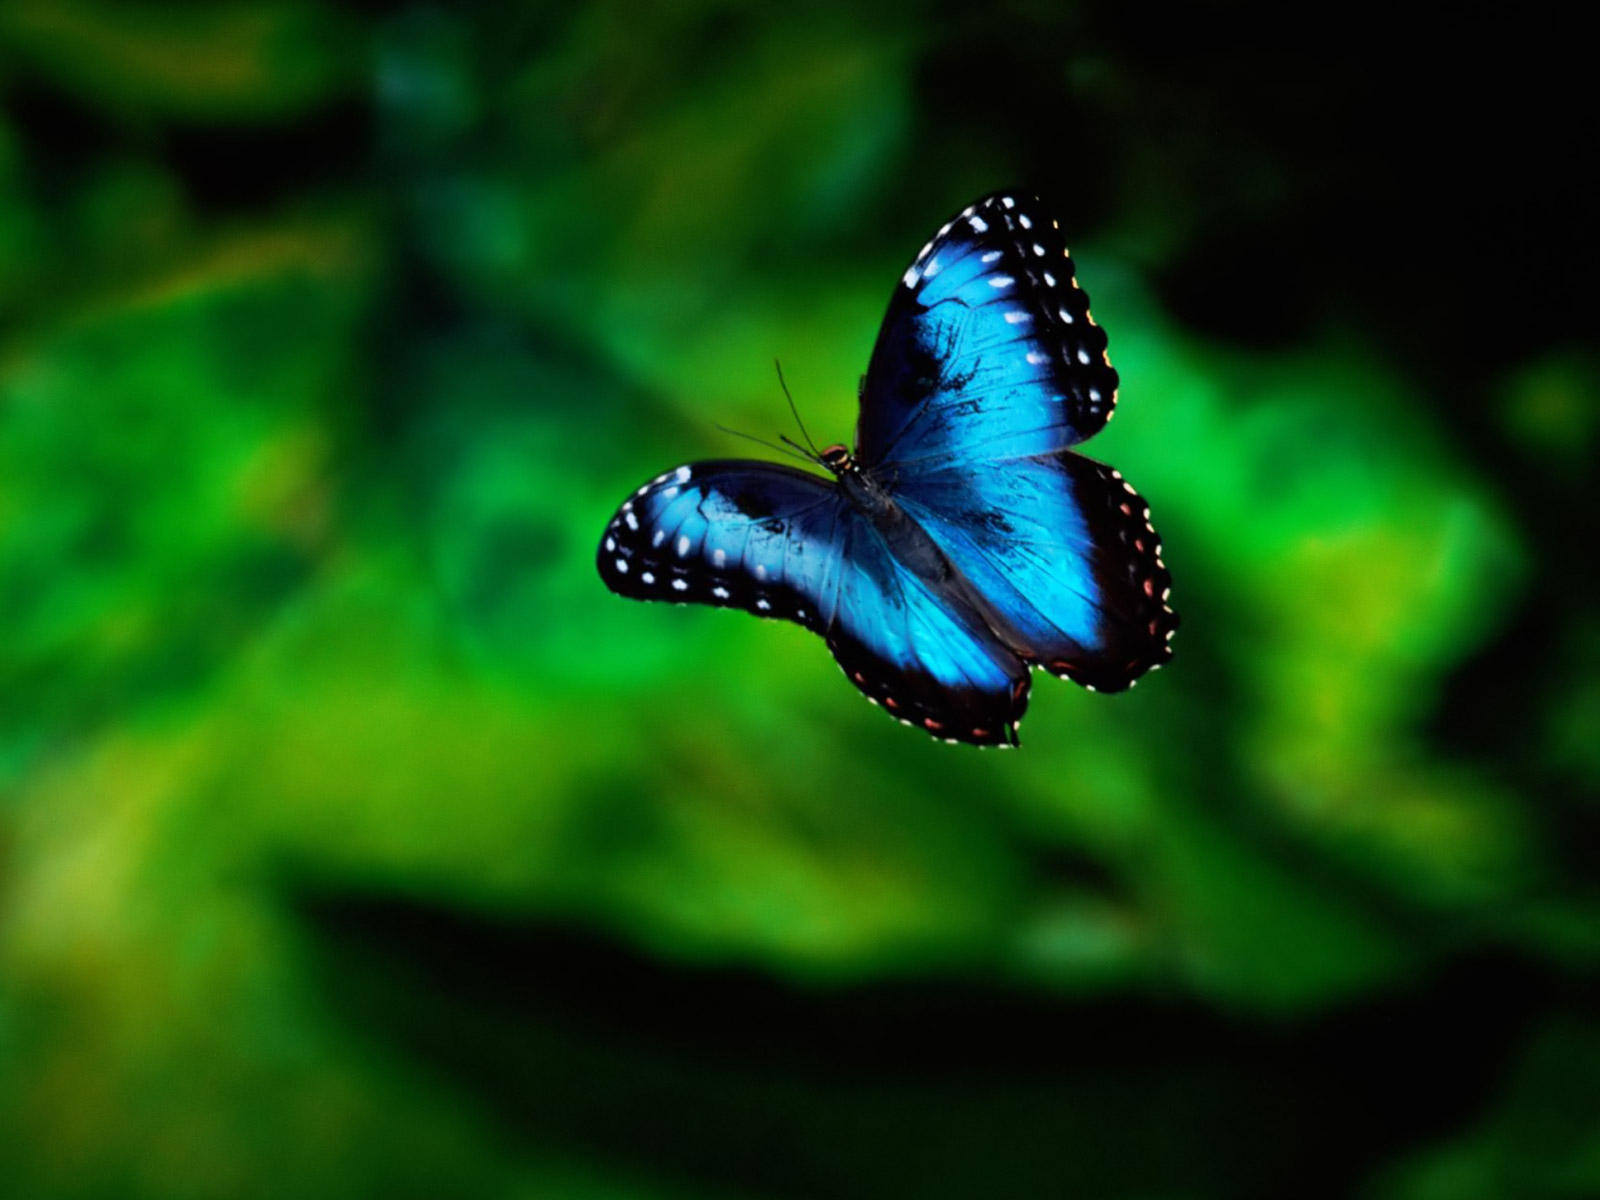 Real Butterfly Wallpapers